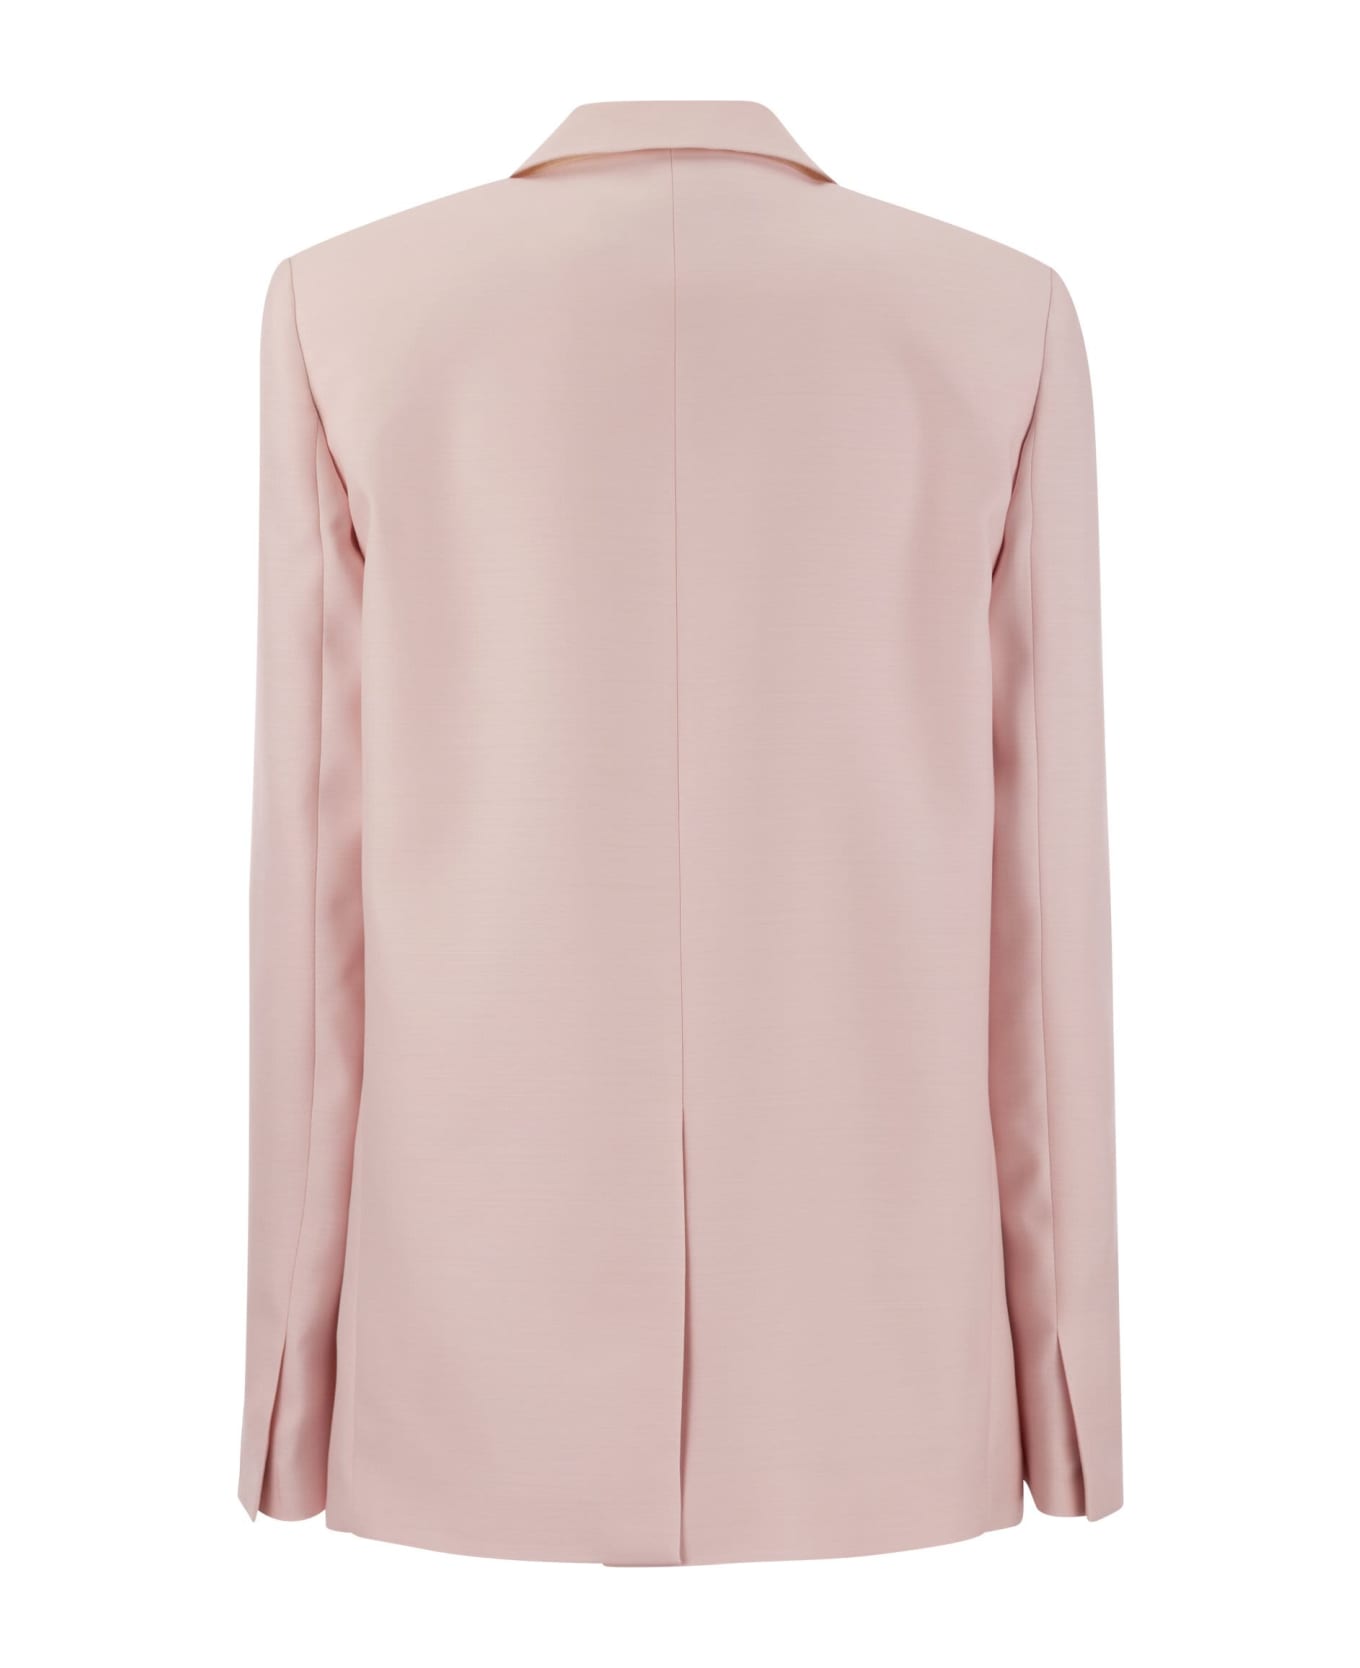 Fabiana Filippi Double-breasted Jacket In Wool And Silk - Pink